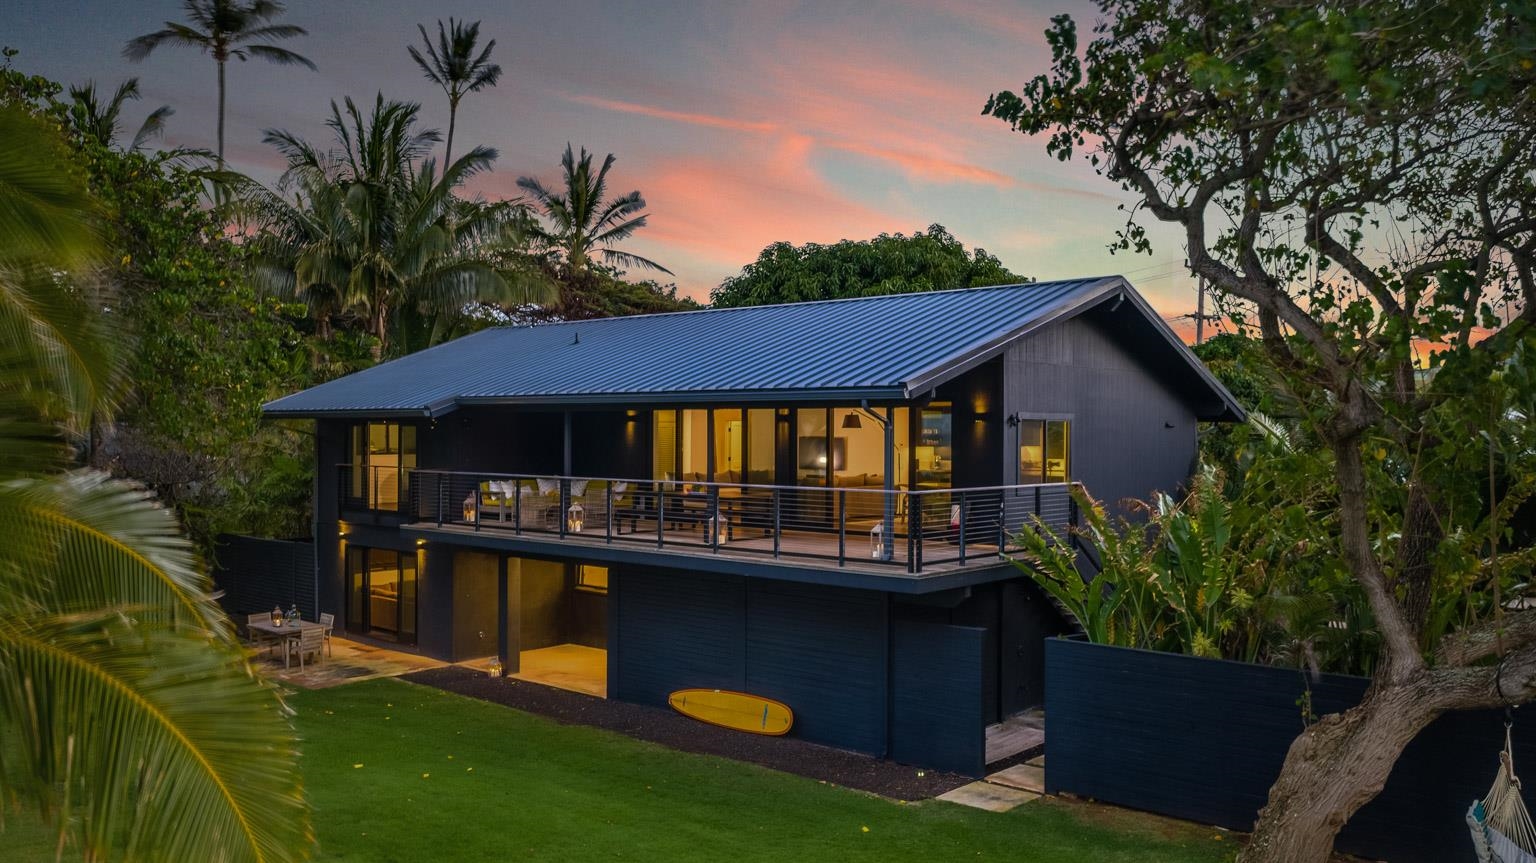 Located in the timeless beachfront community of Paia sits a modern, stylish private beach home.  Poised on a lush grassy knoll with 170 feet of sandy beachfront, enter through a private gate to this .67 of an acre compound.  Once inside, your world shifts and slows down, as the transition to beach life begins.  The first home is a classic iconic over 1,000sf cottage built-in 1910.  The main home is modern, and a comfortable 4,300sf beach home with all amenities.  Sleep in while you gaze from your bedroom across your compound to the turquoise blue ocean.  Enjoy an easy 3 mile stroll of beach walks right from your front door.  The entire compound is well set up for indoor-outdoor living amenities.  The covered lanai has sweeping Pacific Ocean views and is complemented by modern and cozy living areas, including a chef-style kitchen, clean white marble bathrooms and 3 car garage.  Extra space is intelligently designed into multiple areas offering plenty of opportunities for weekend gatherings, ohana, beach time, and beautiful sunsets.  Walk into town for over 13 restaurants, mana foods, and 30 boutiques.  This is a rare opportunity to be right in the heart of Paia and on a world-class white sand beach.  Beautifully furnished totally turnkey just bring your bathing suit and surfboard.  Owner interested in selling a 50 percent interest where both owners would have 6 months each.